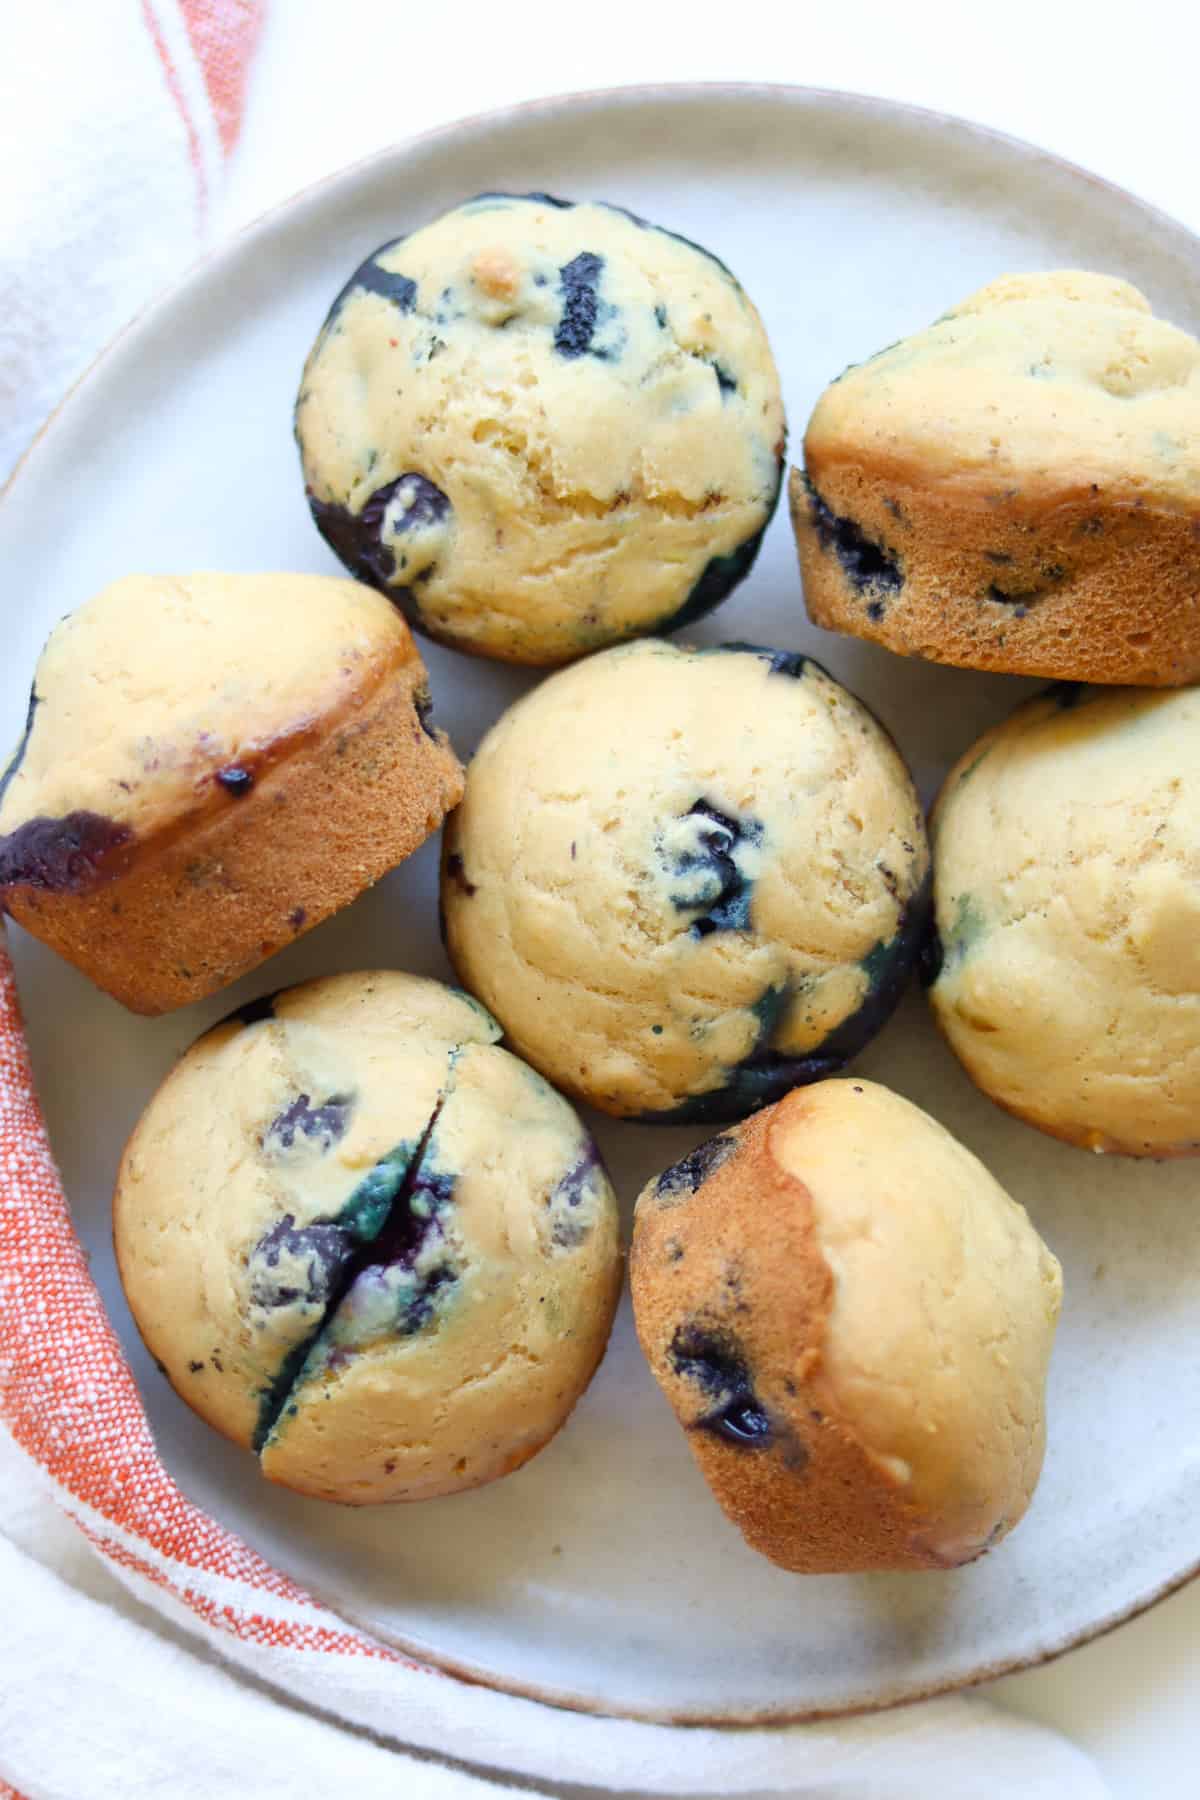 Baked blueberry muffins on a white plate.